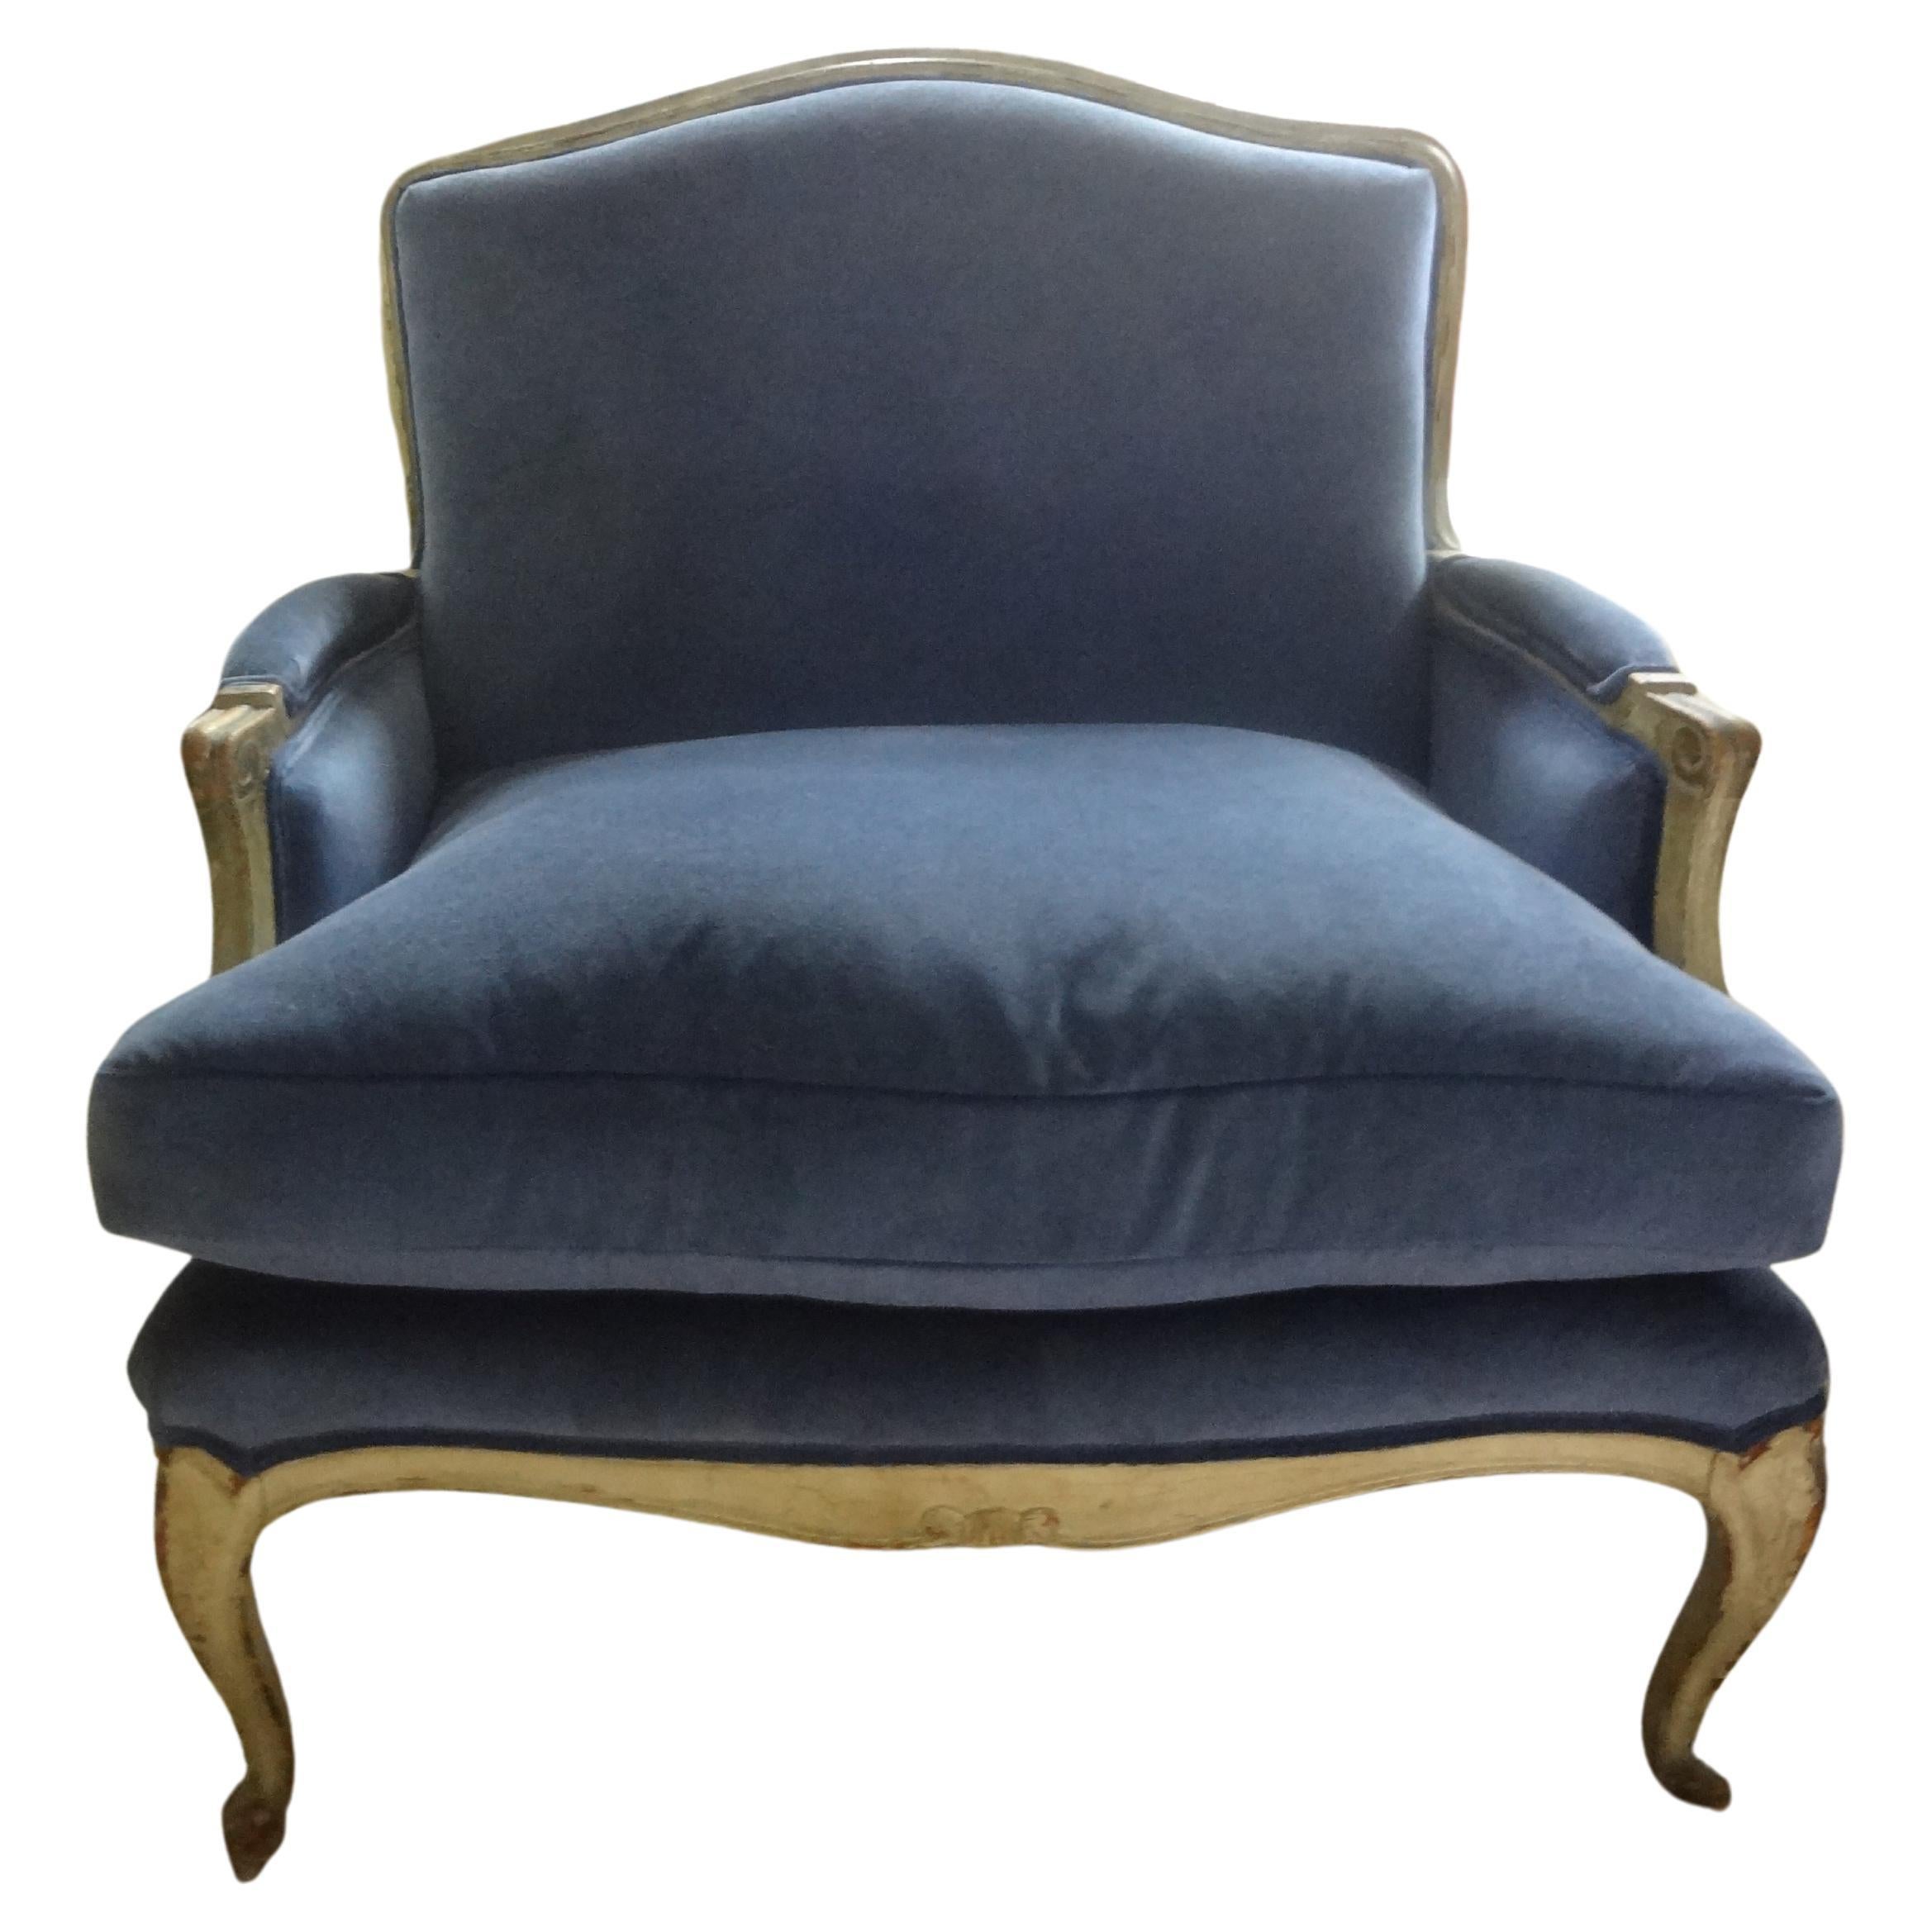 Pair of 19th century Italian Louis XV-XVI Style Painted Marquise. Marquises are oversized bergeres, loveseats or large chairs. This stunning pair of matching Italian Louis XVI style painted marquises or bergère chairs have been professionally